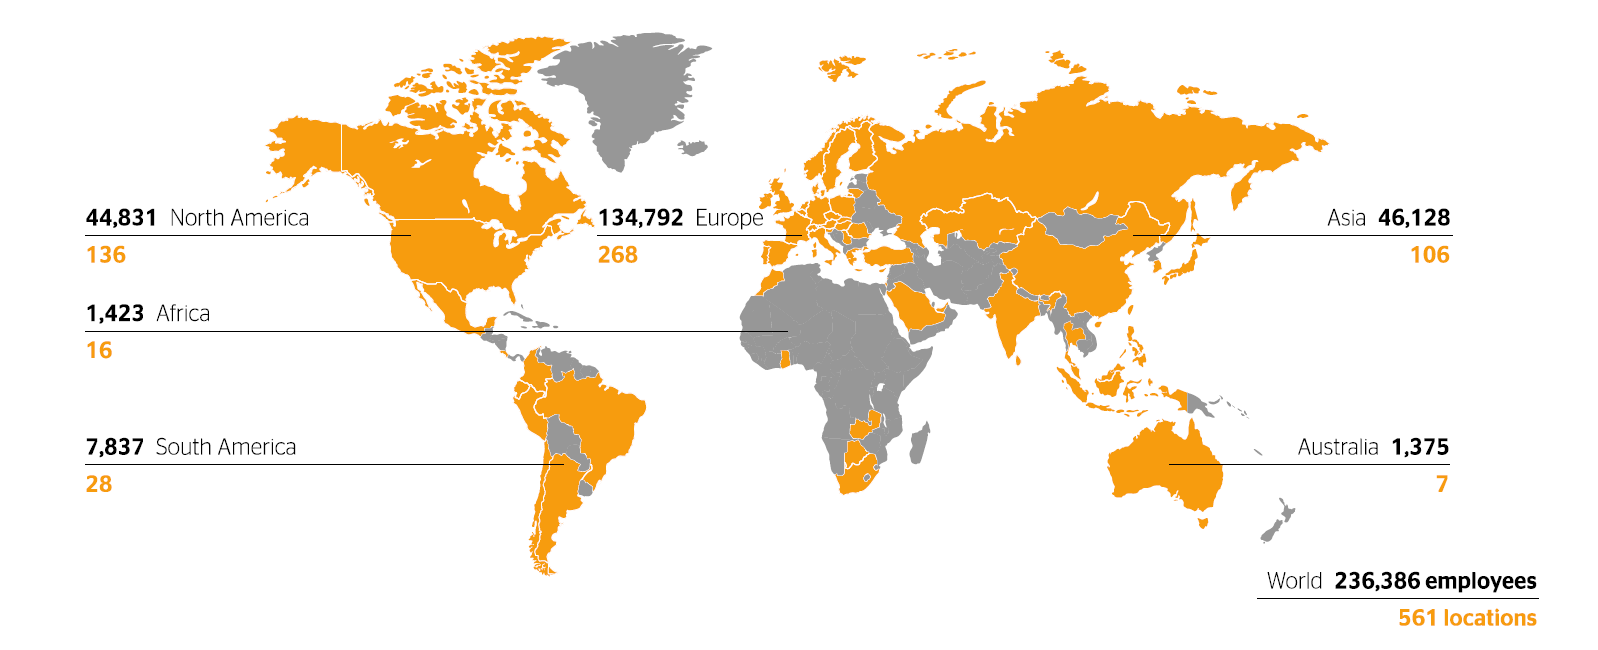 561 locations in 58 countries and markets